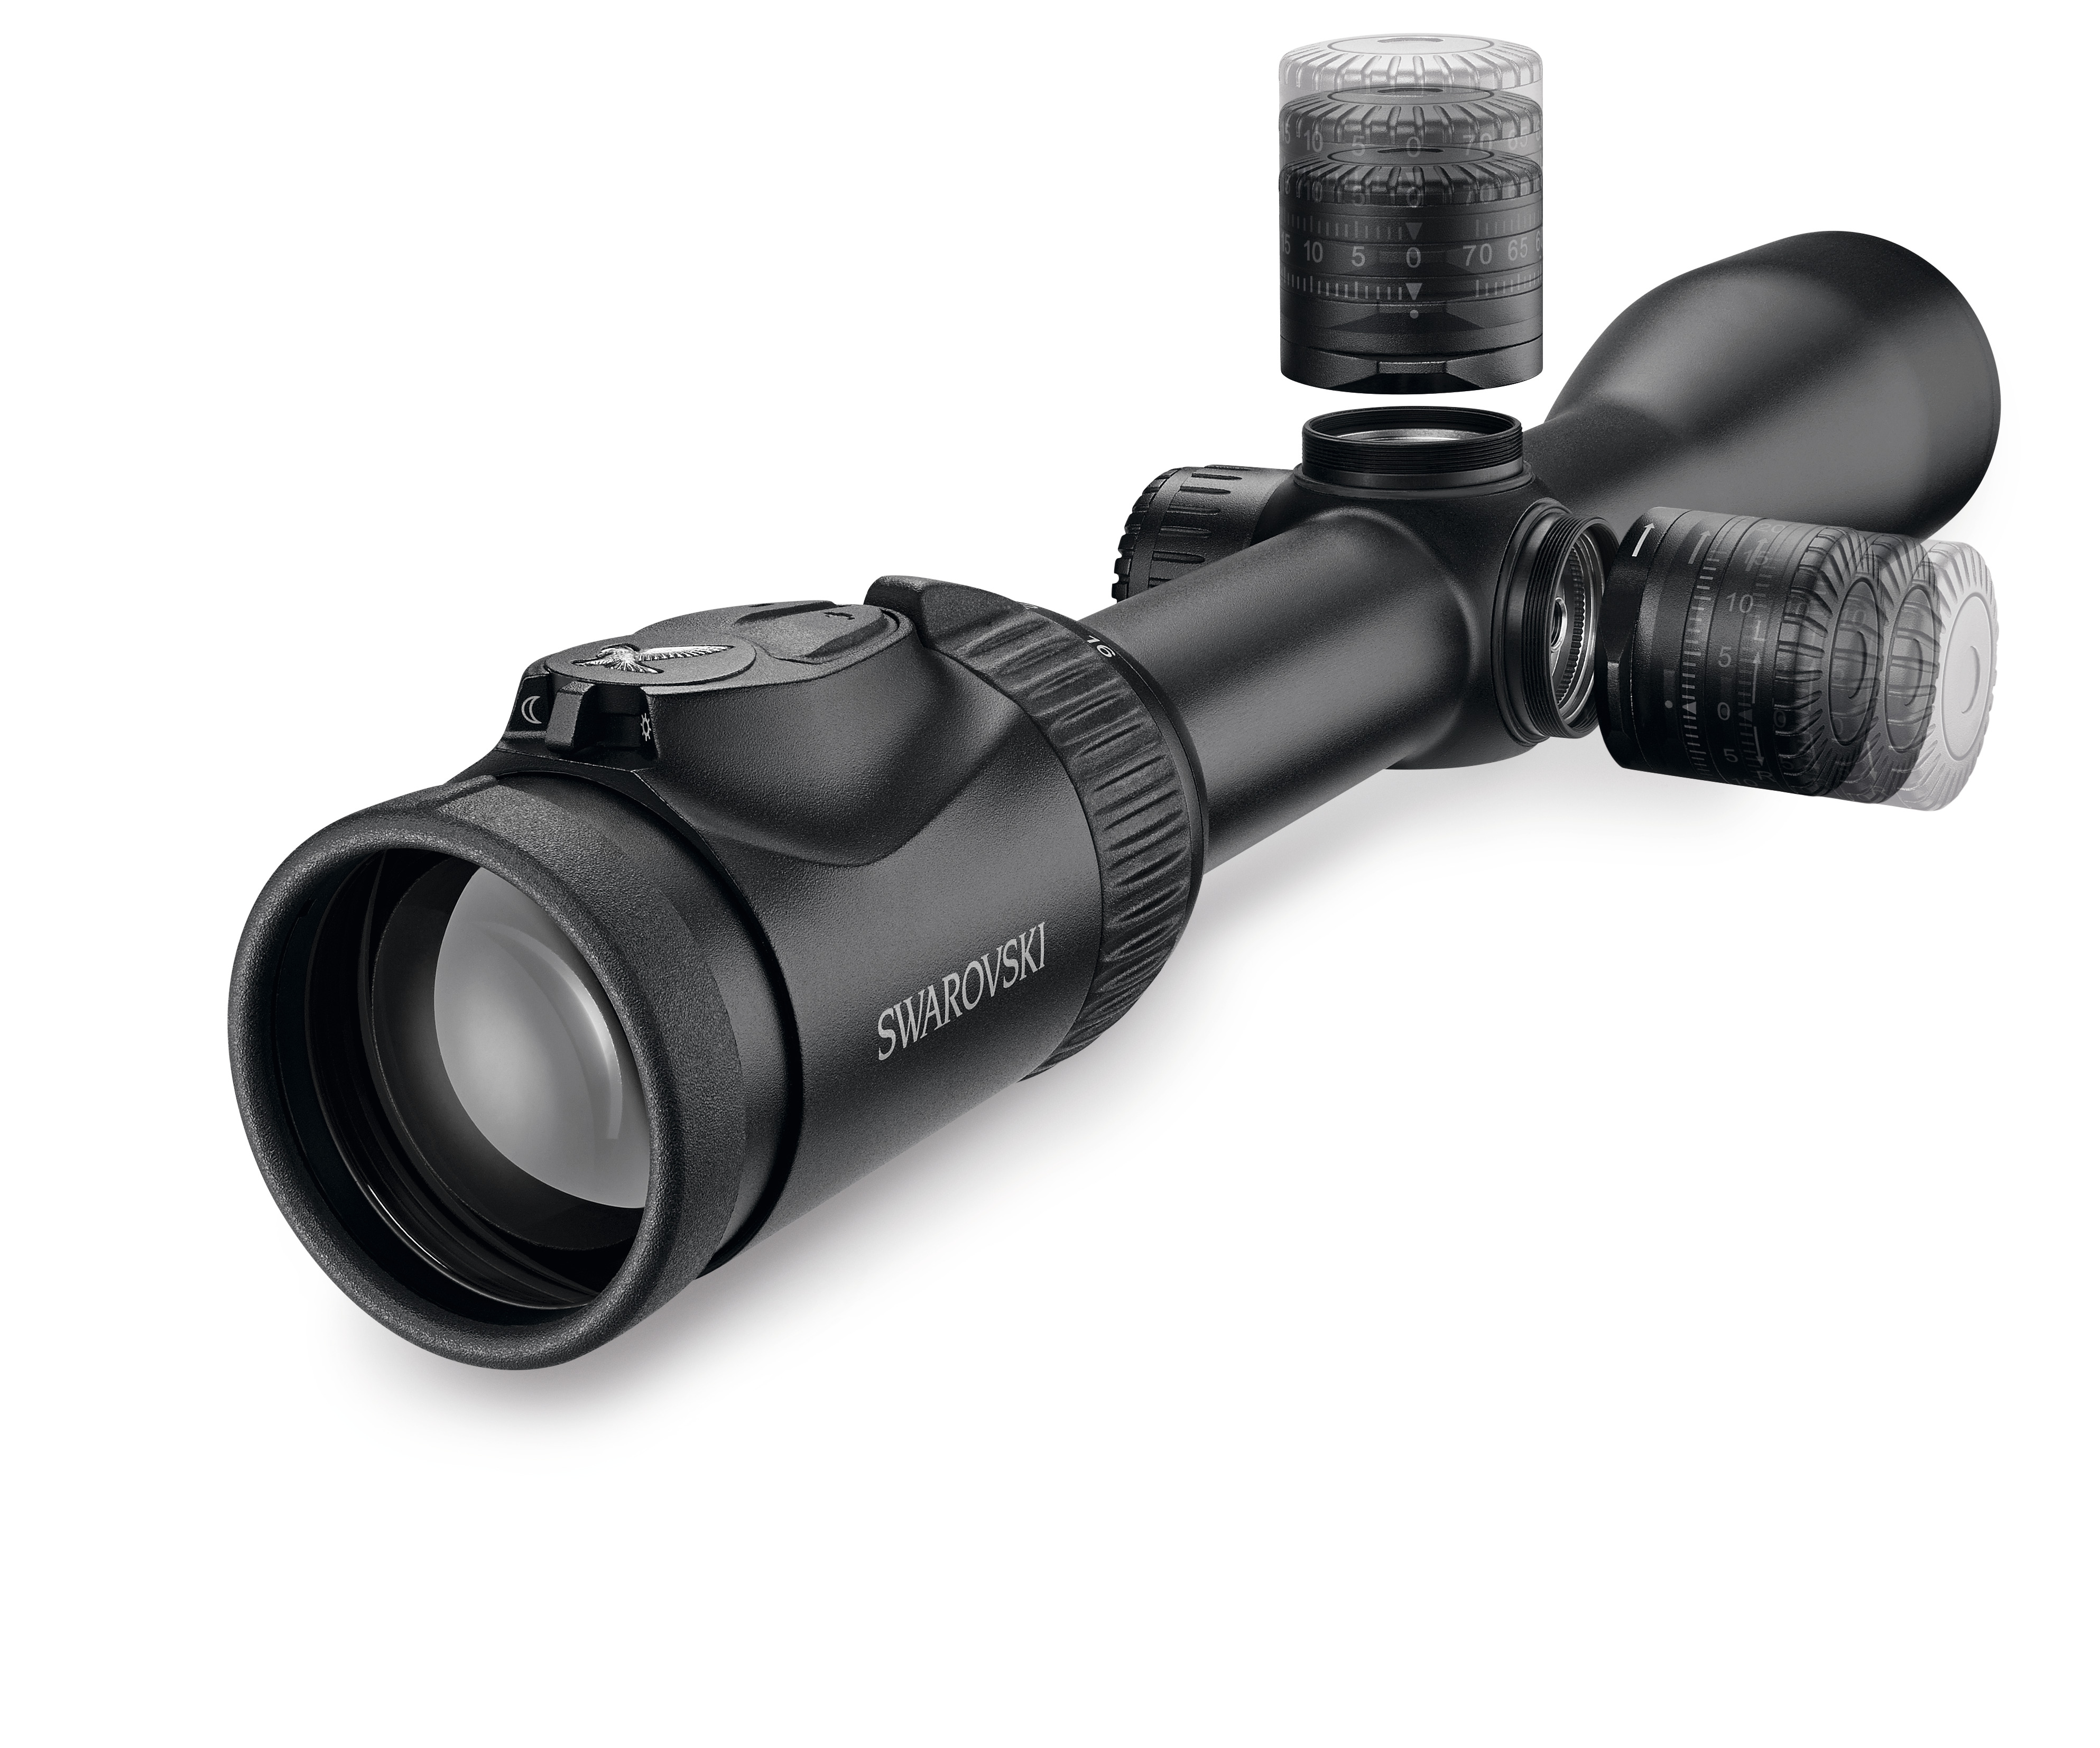 The Z8i rifle scopes are impressively versatile thanks to the ballistic turret, the switchable reticle, and its powerful 8x zoom.